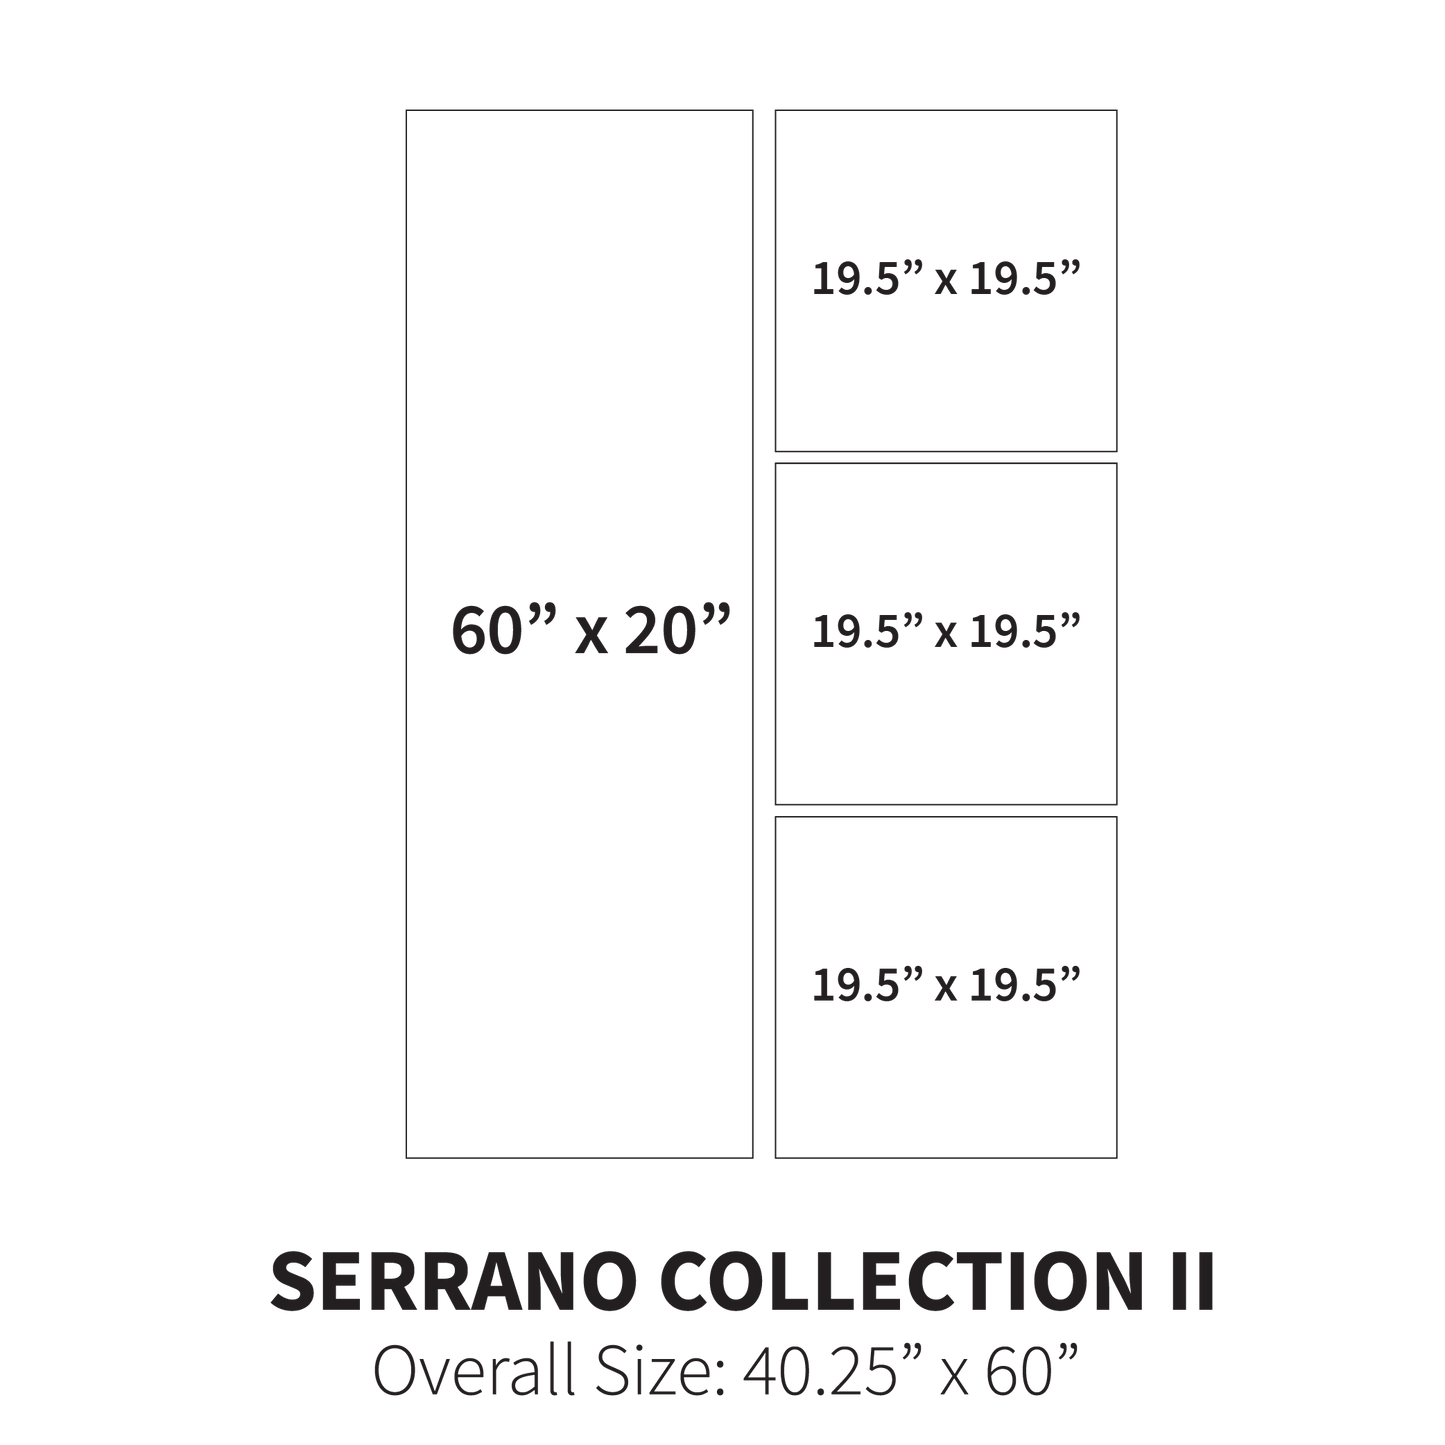 Serrano Collection II (Overall Size: 60" x 40")